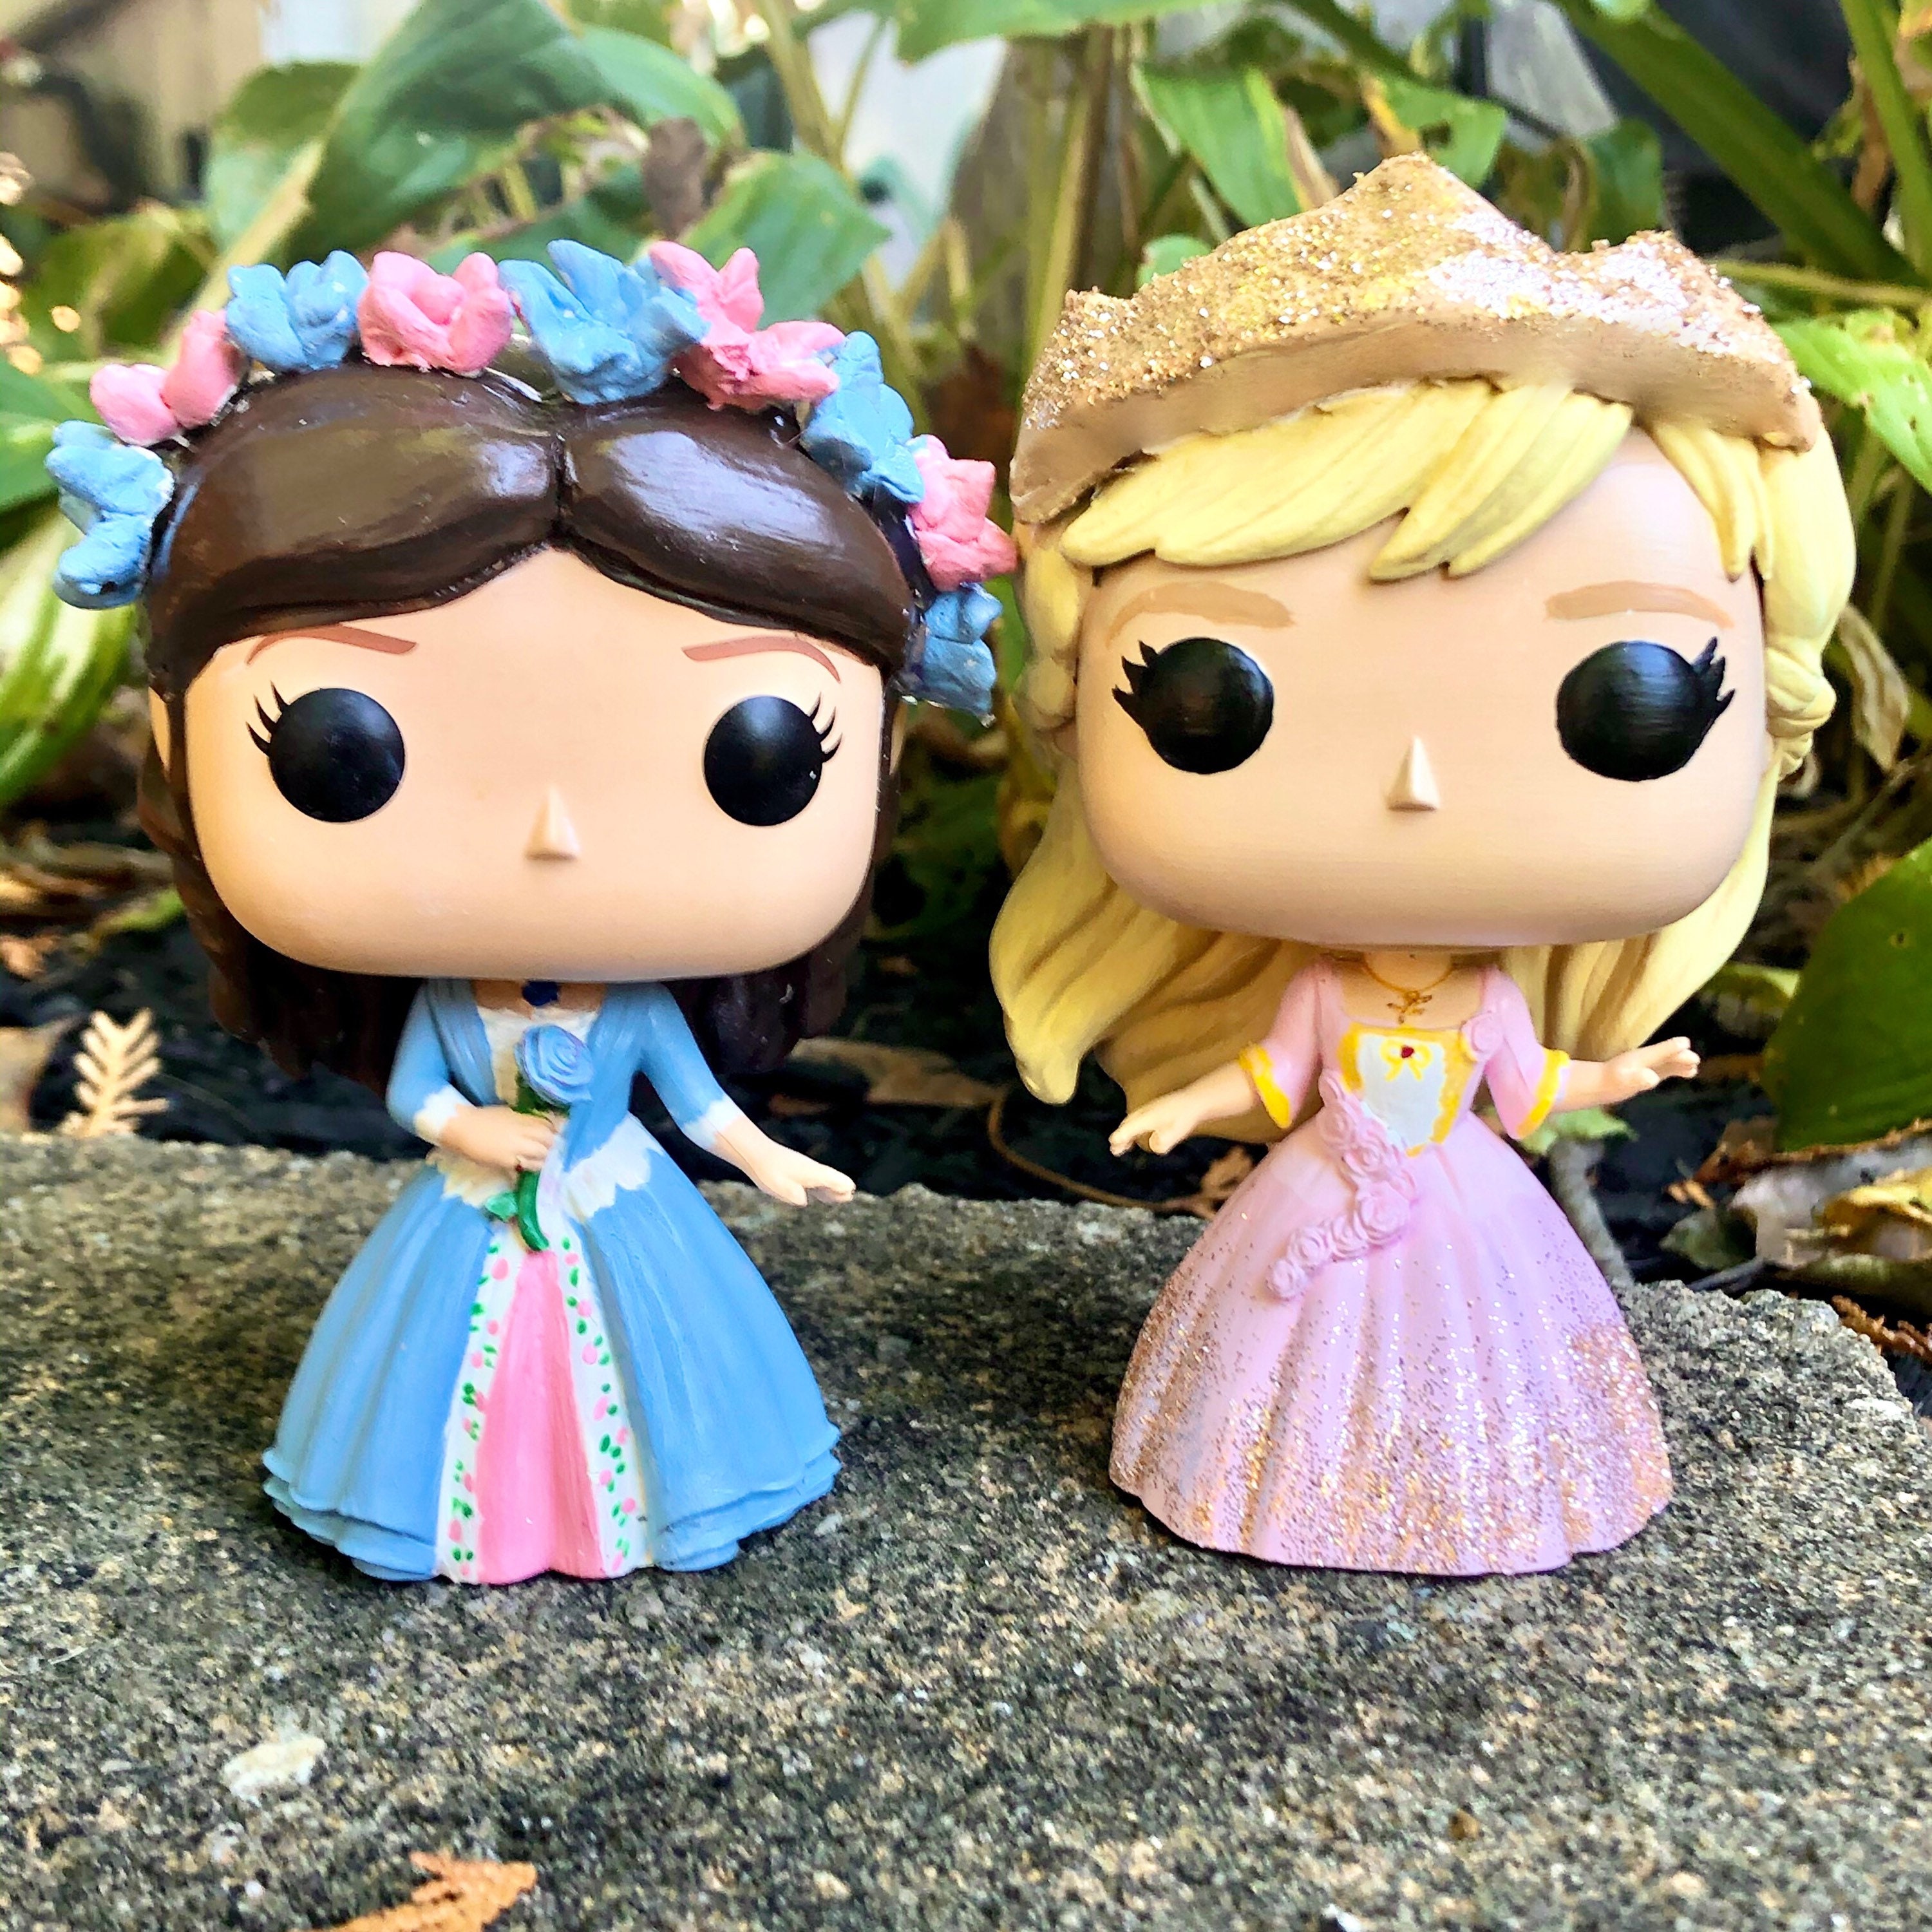 My barbie collection ✨ . Barbie as the princess and the pauper